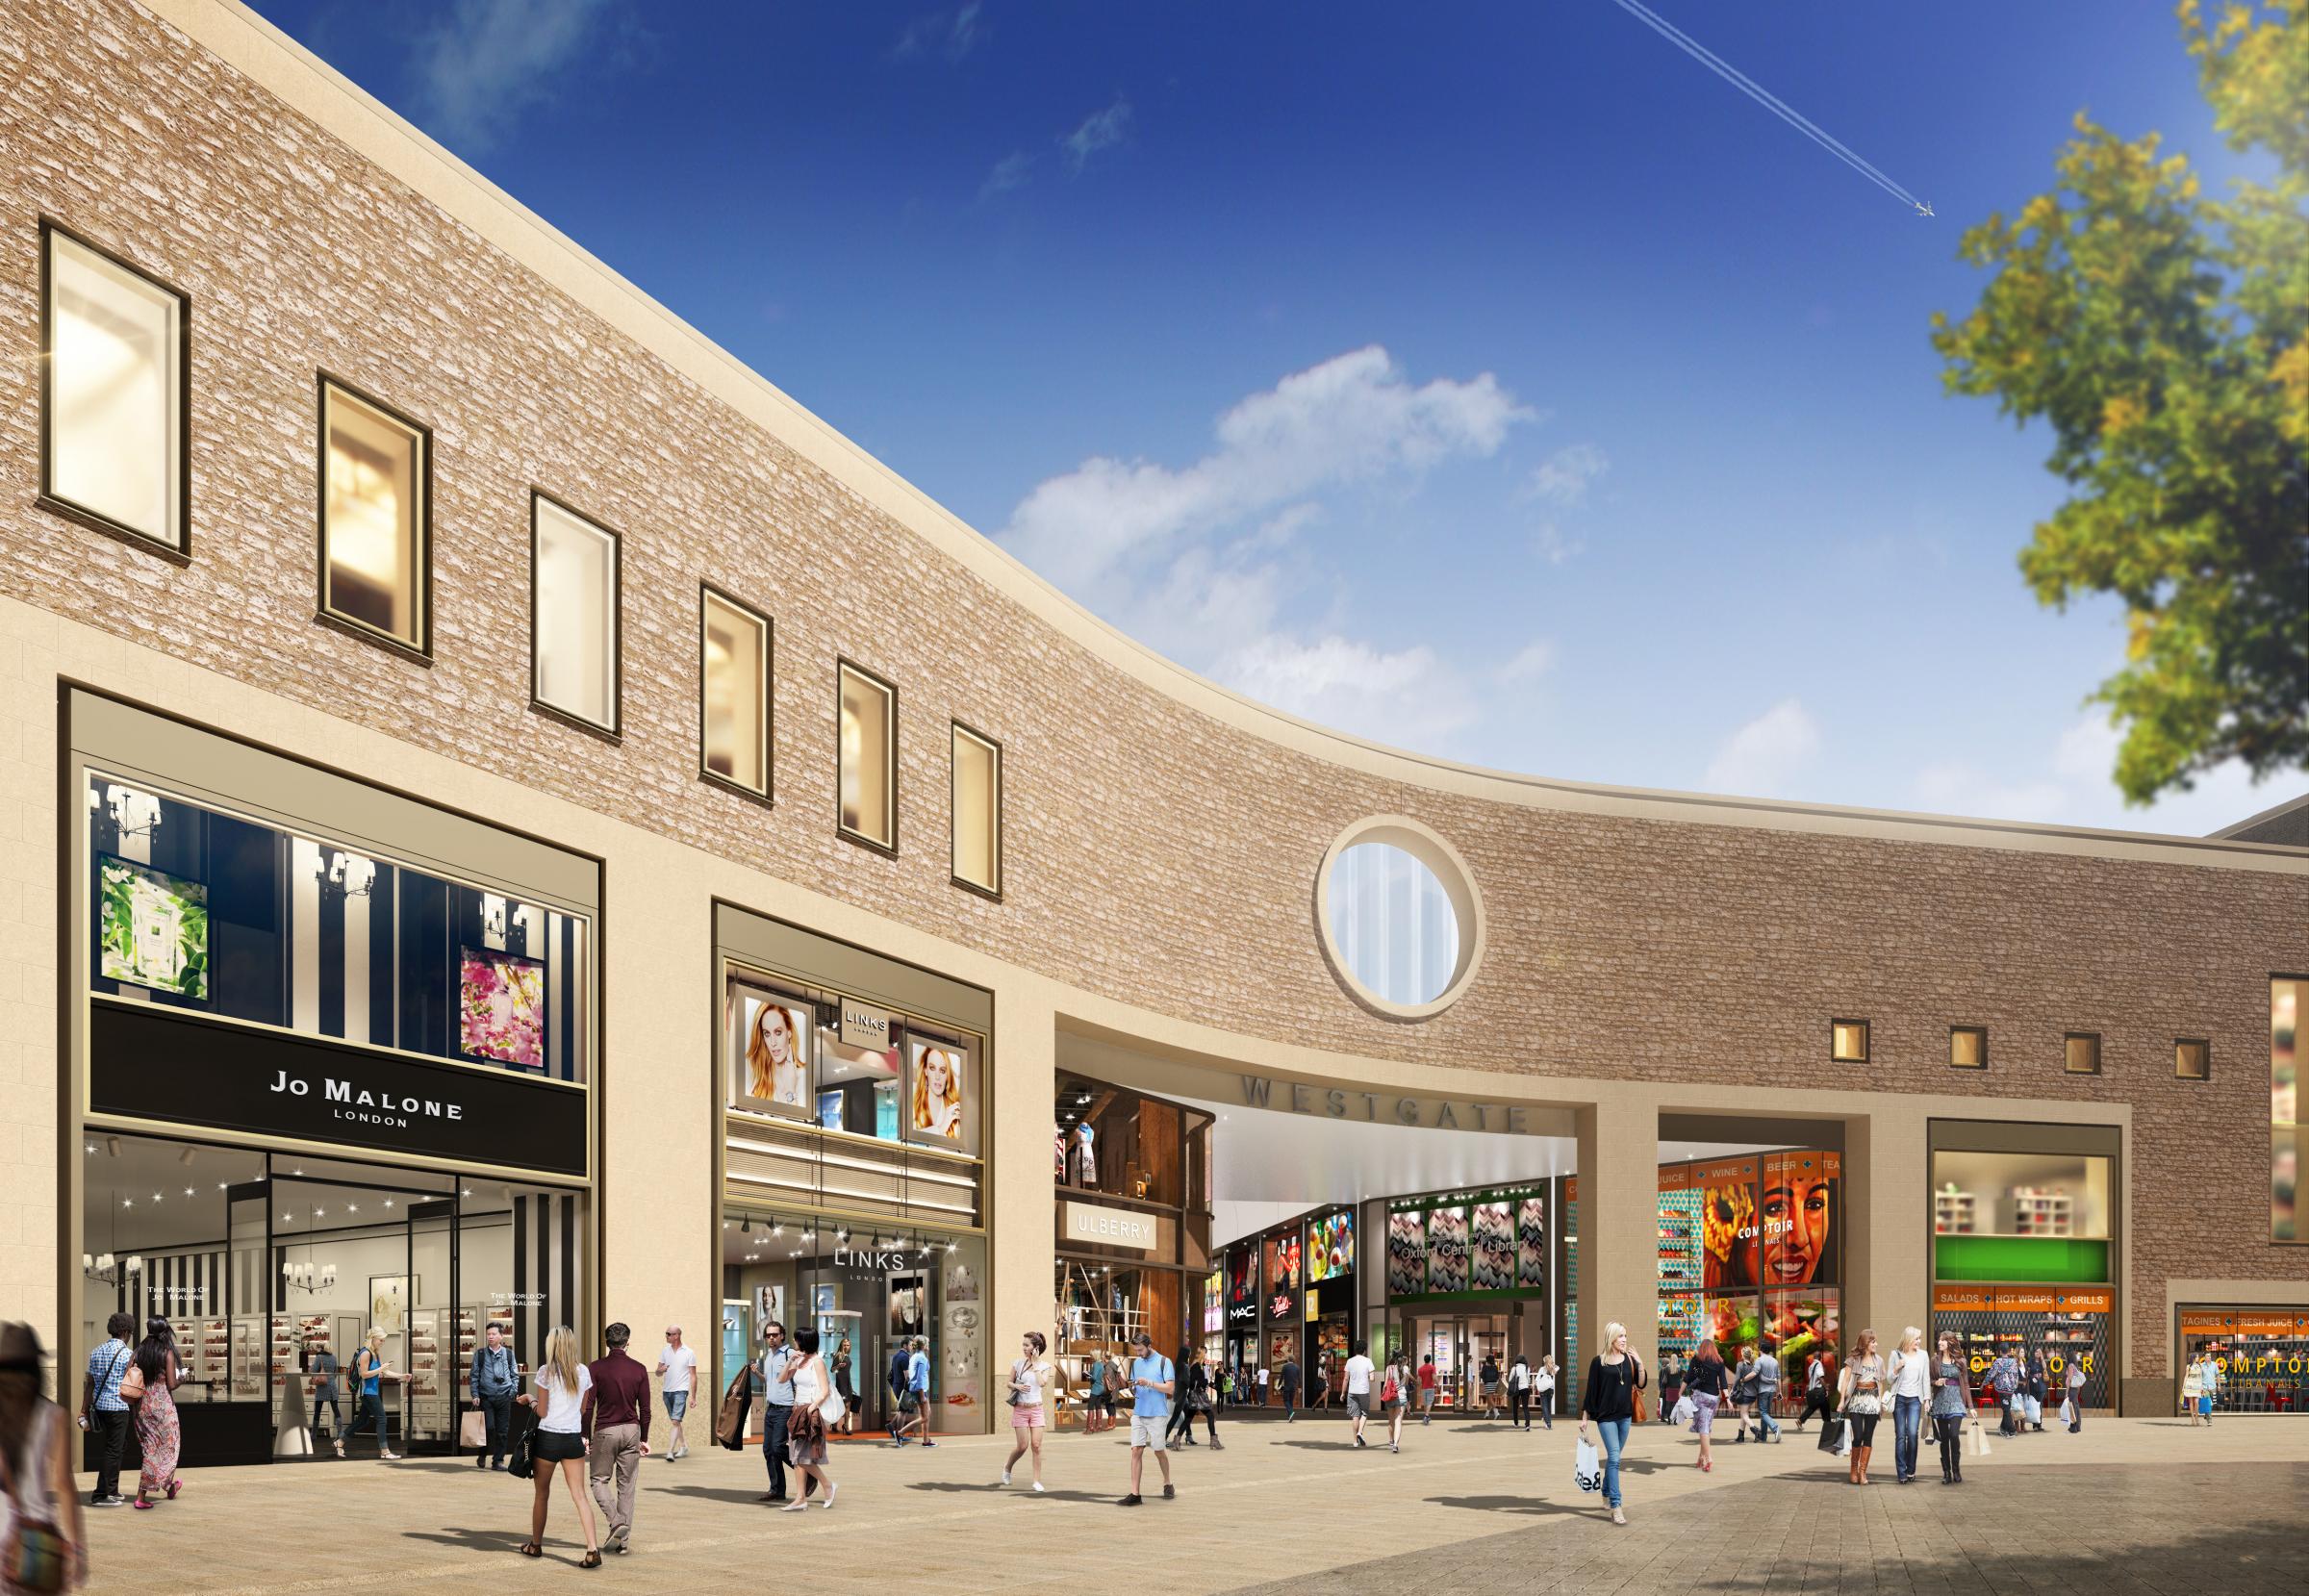 Here are the shops open at the Westgate 